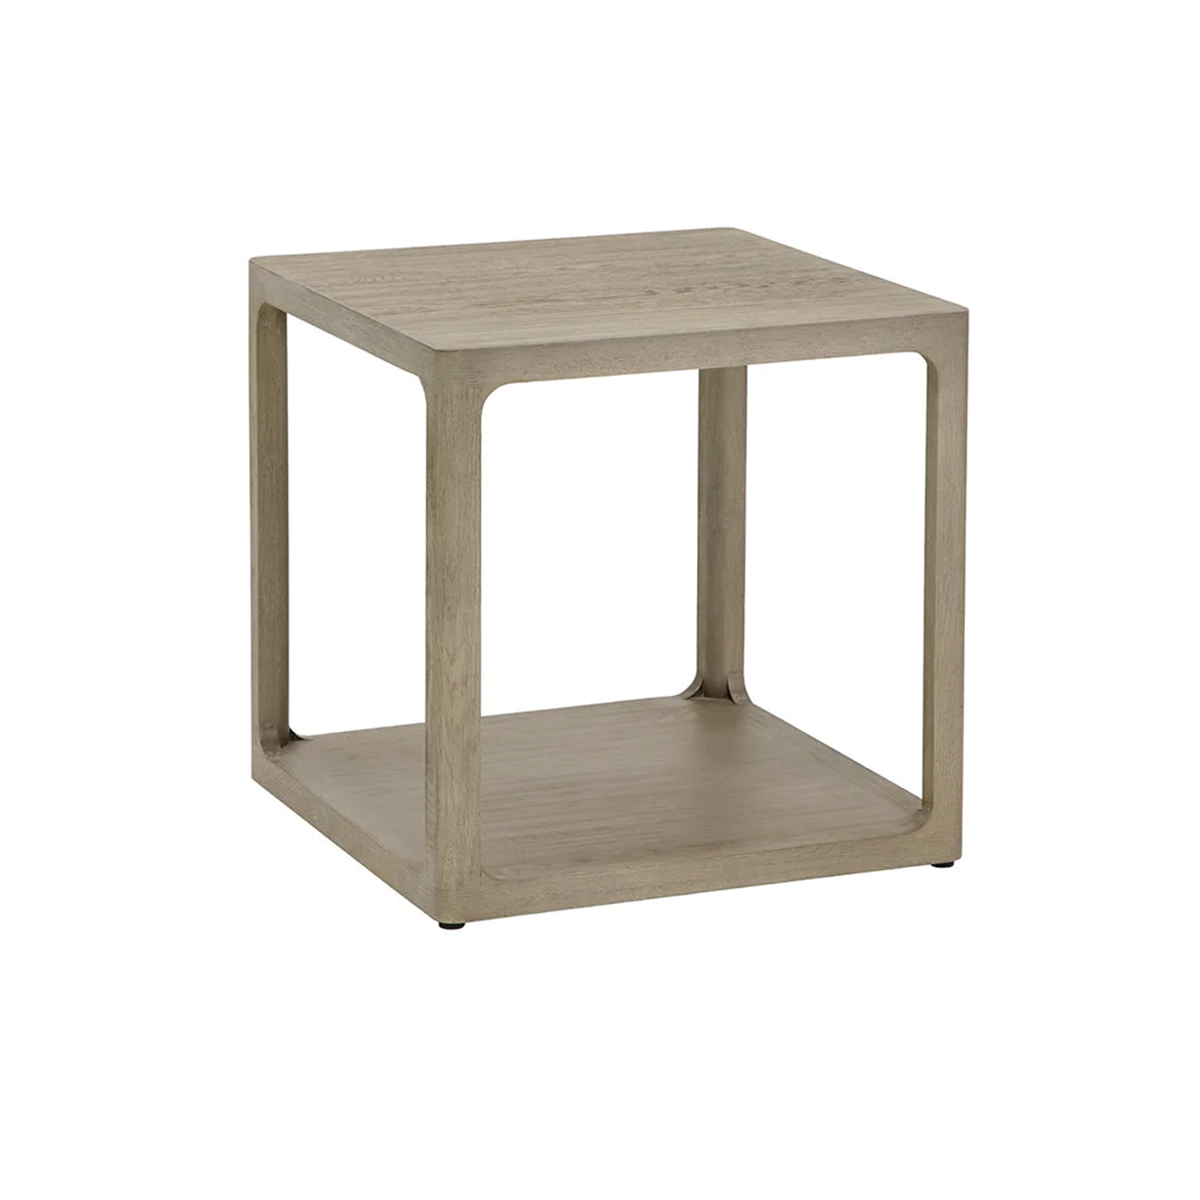 Doncaster Side Table By Sunpan White Background2